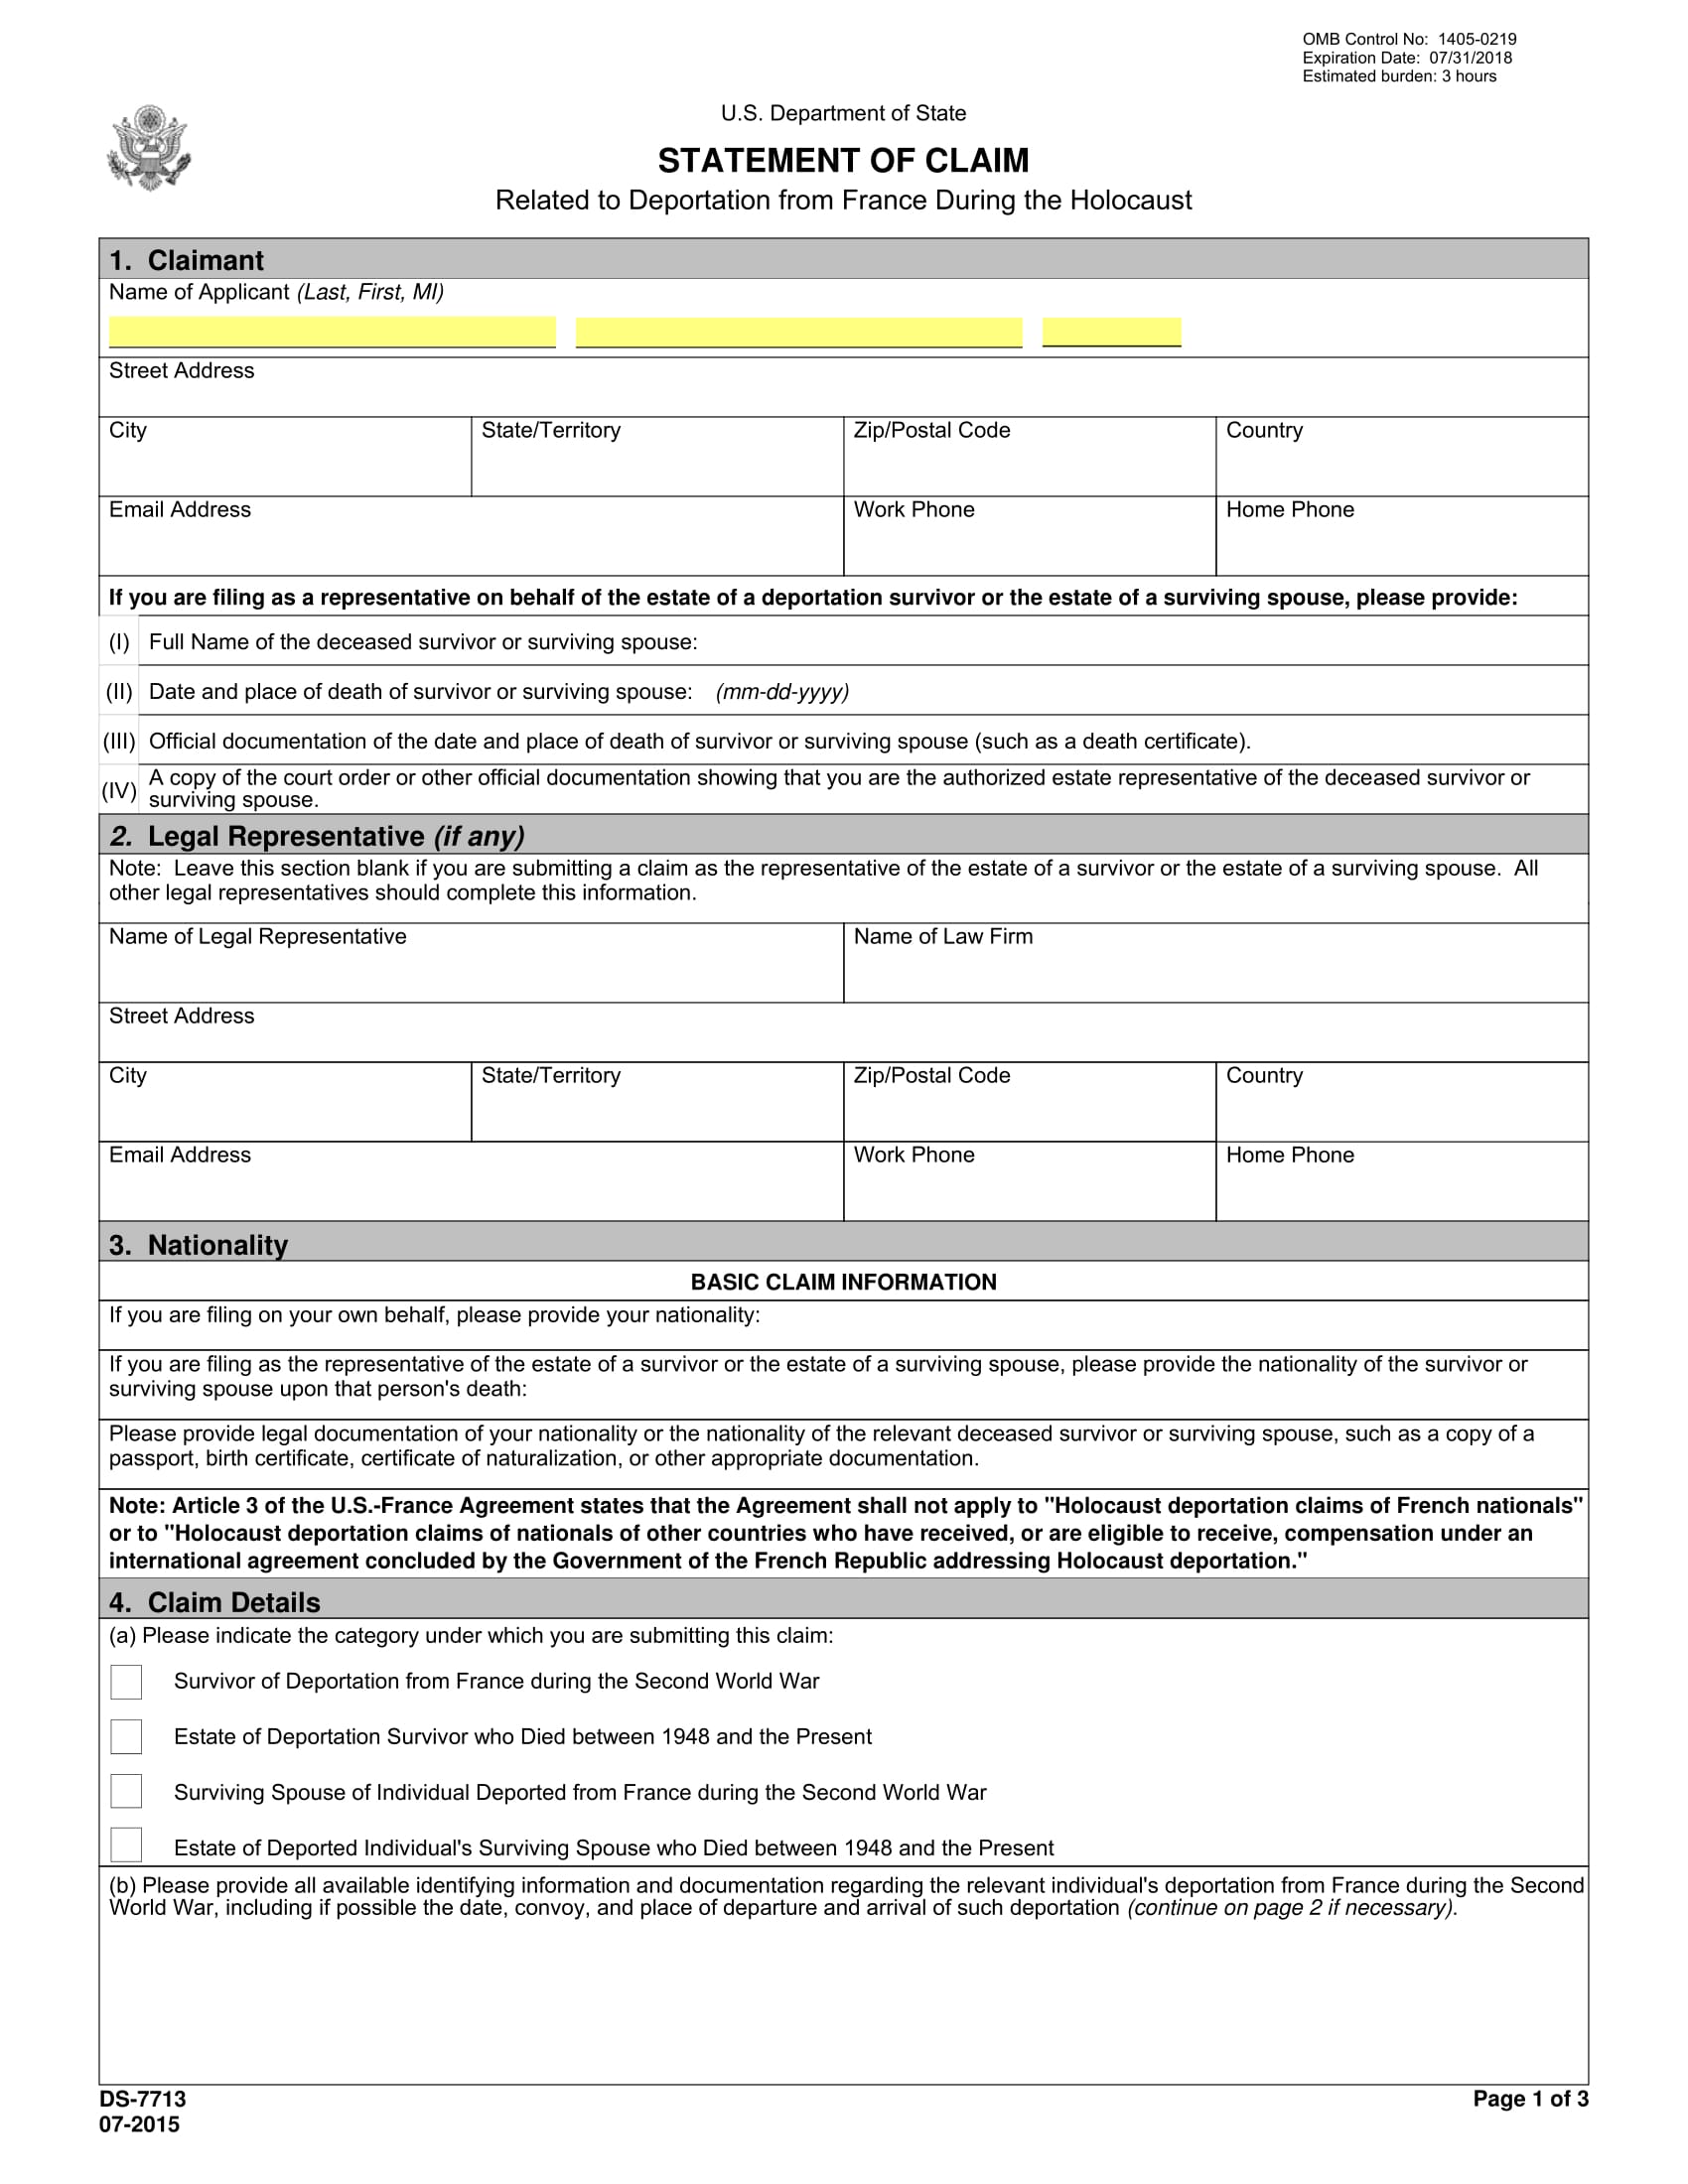 official claim statement form 1